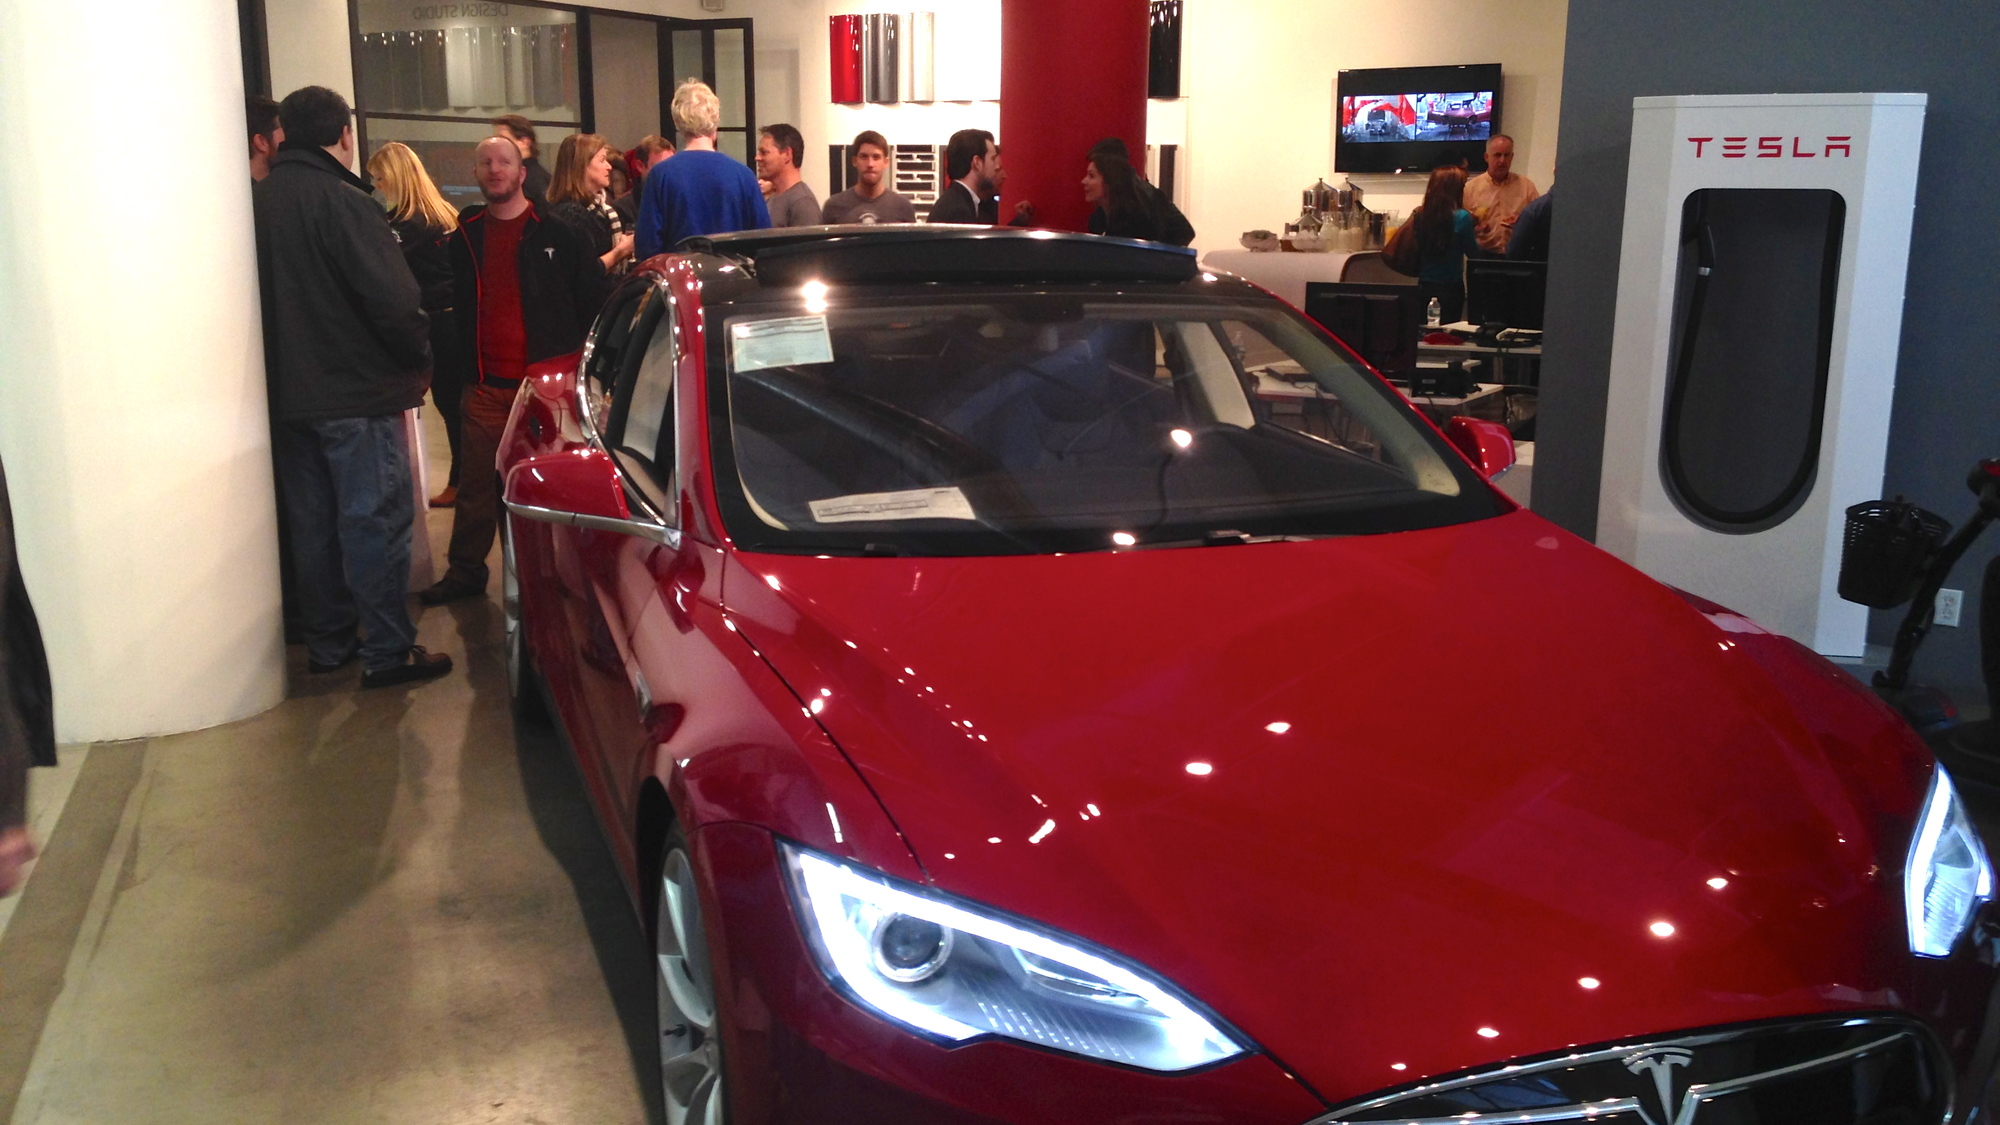 Reception at Tesla Store in New York Ciy following cross-country road trip in Model S electric cars